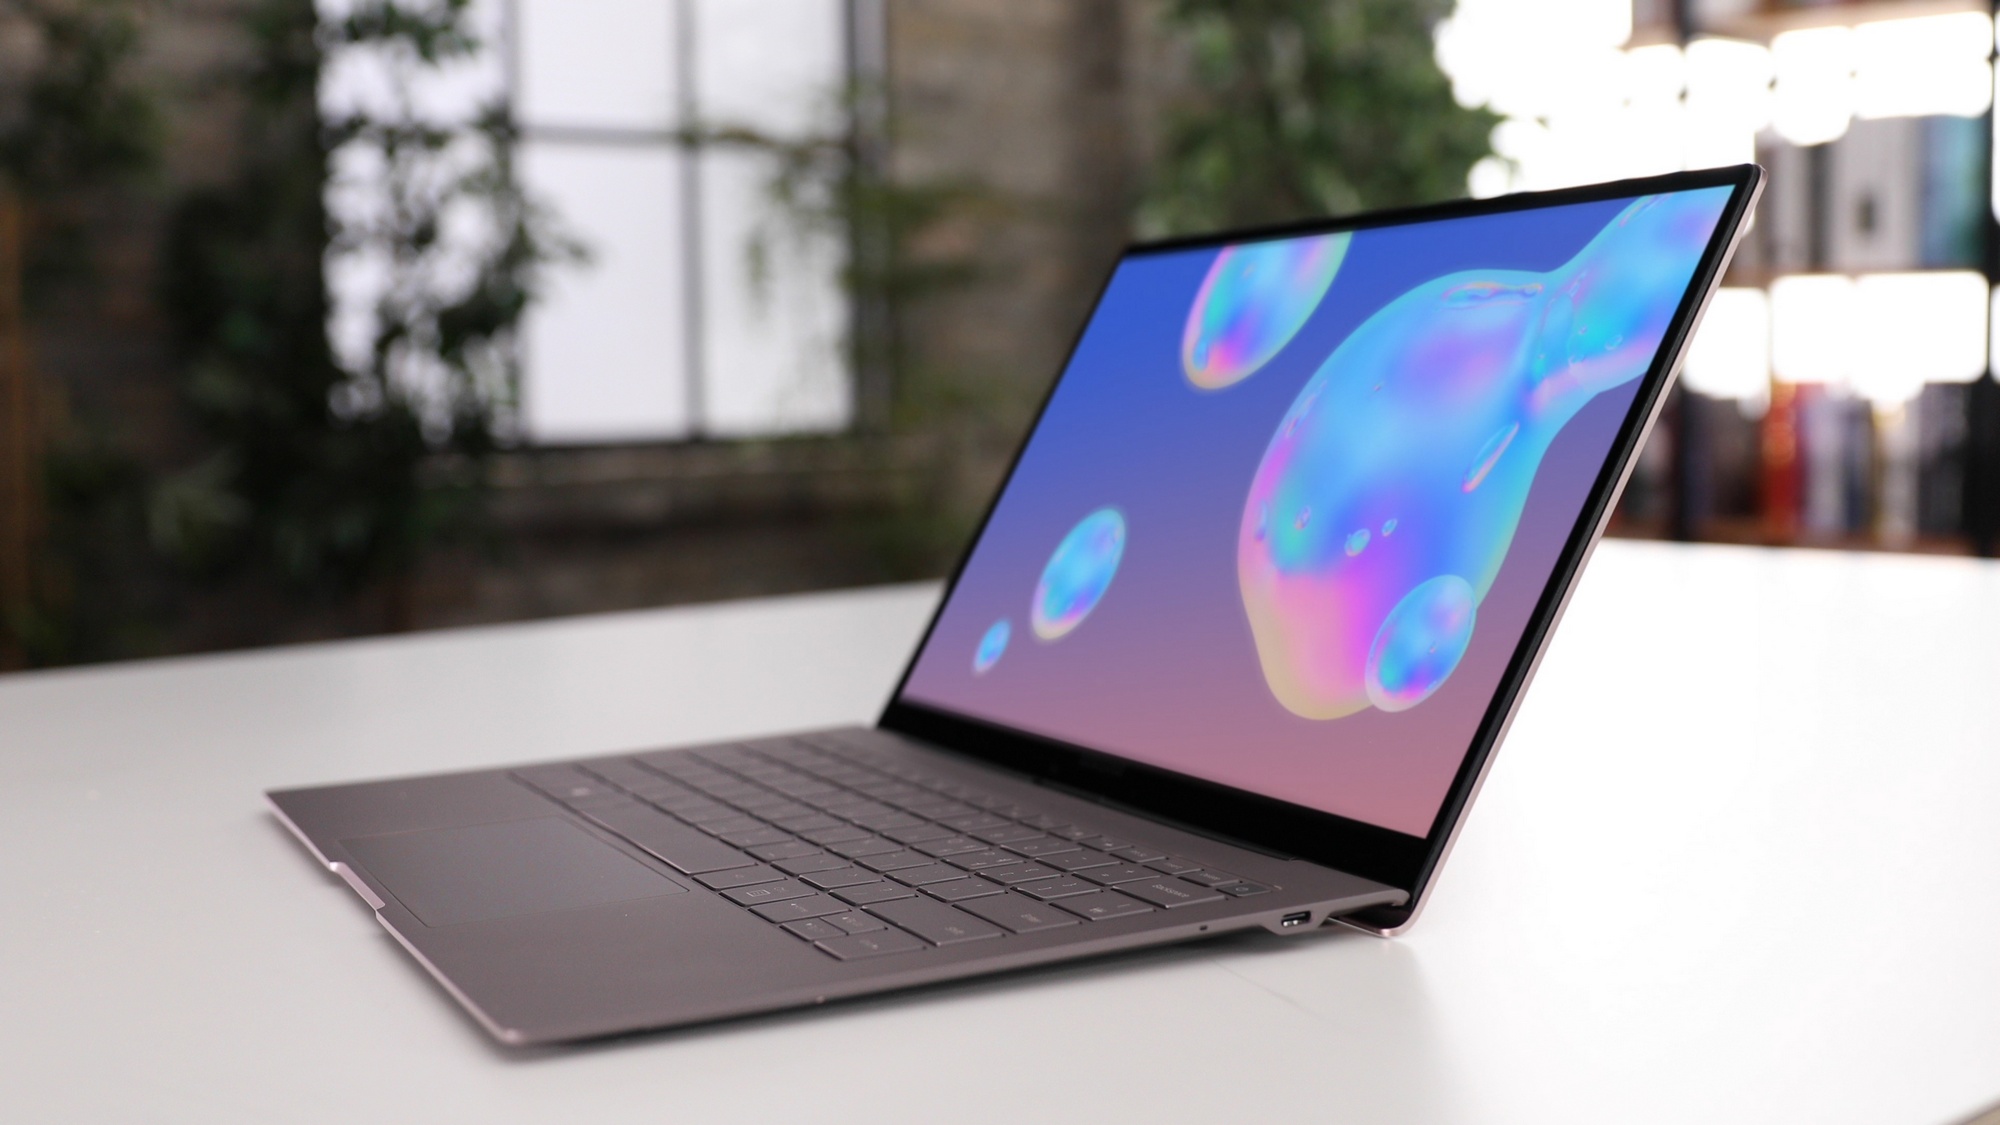 Samsung Galaxy Book S laptop review - pros and cons